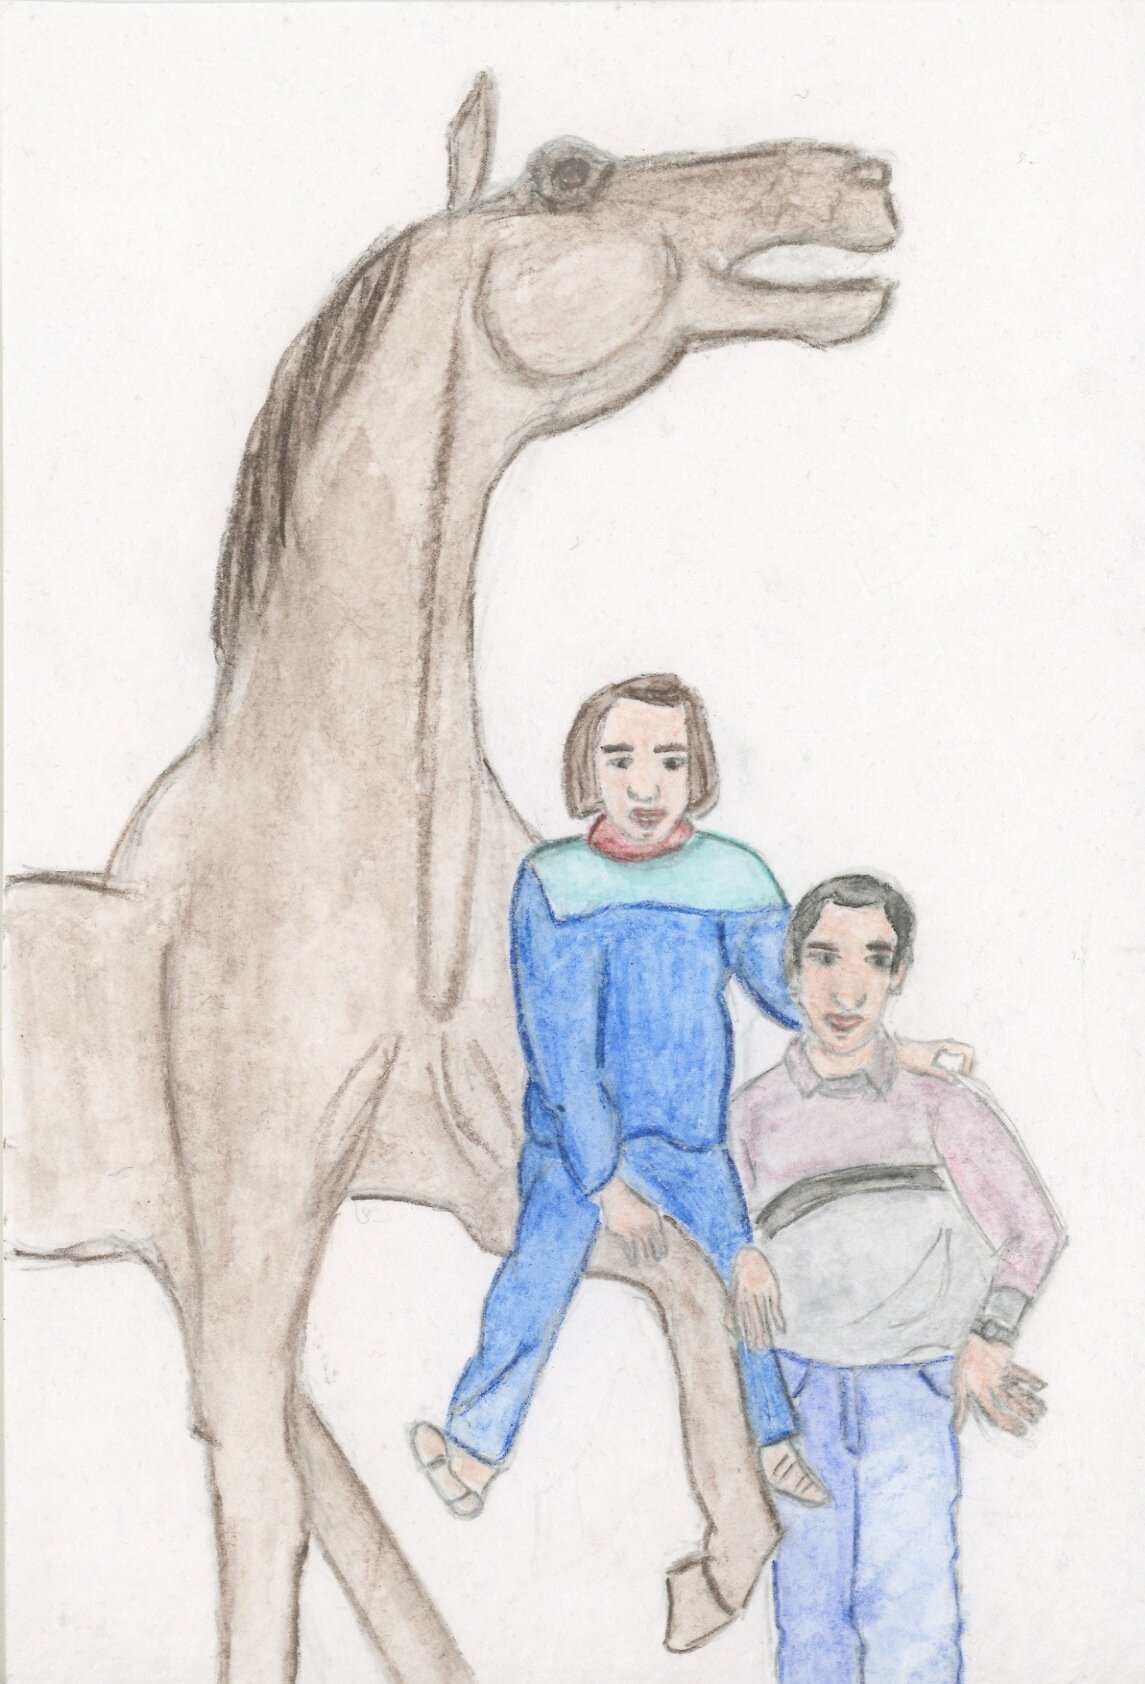 Little girl posing with her brother on a horse sculpture in a public garden,12.7 x 17.8 cm, 2021 